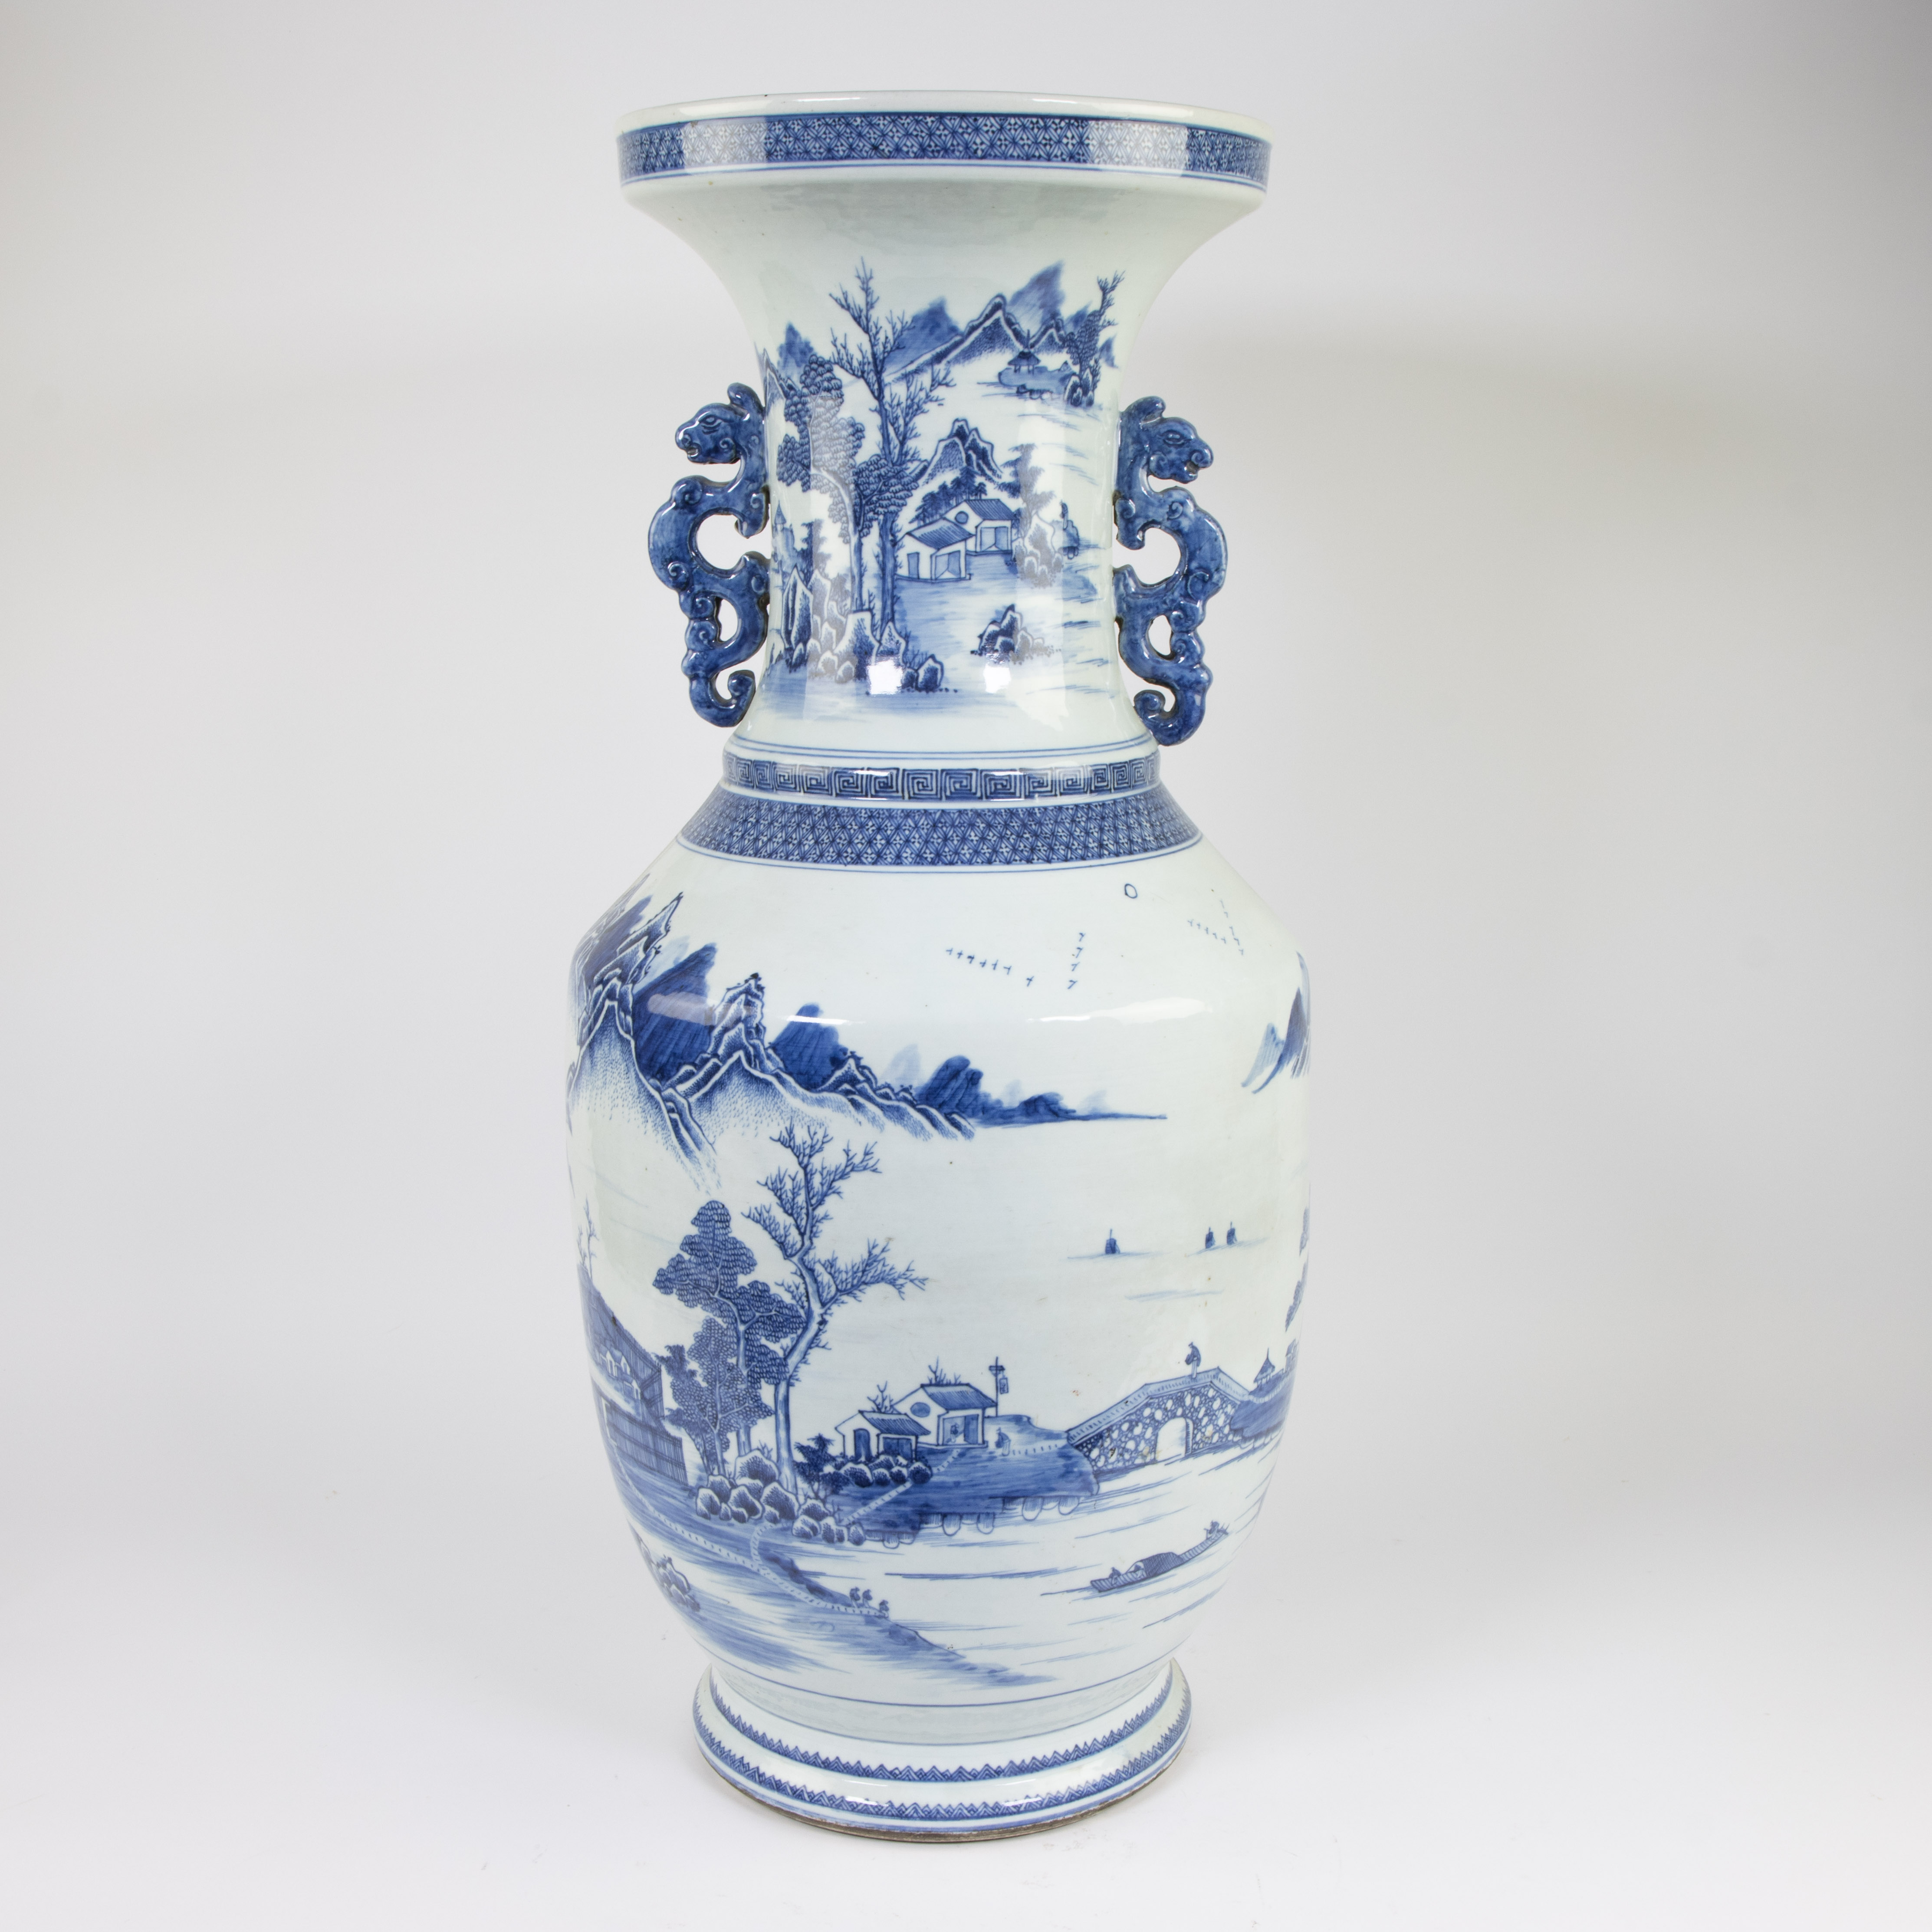 Large Chinese vase blue/white with floral mountain decor, late 19th century - Image 3 of 8